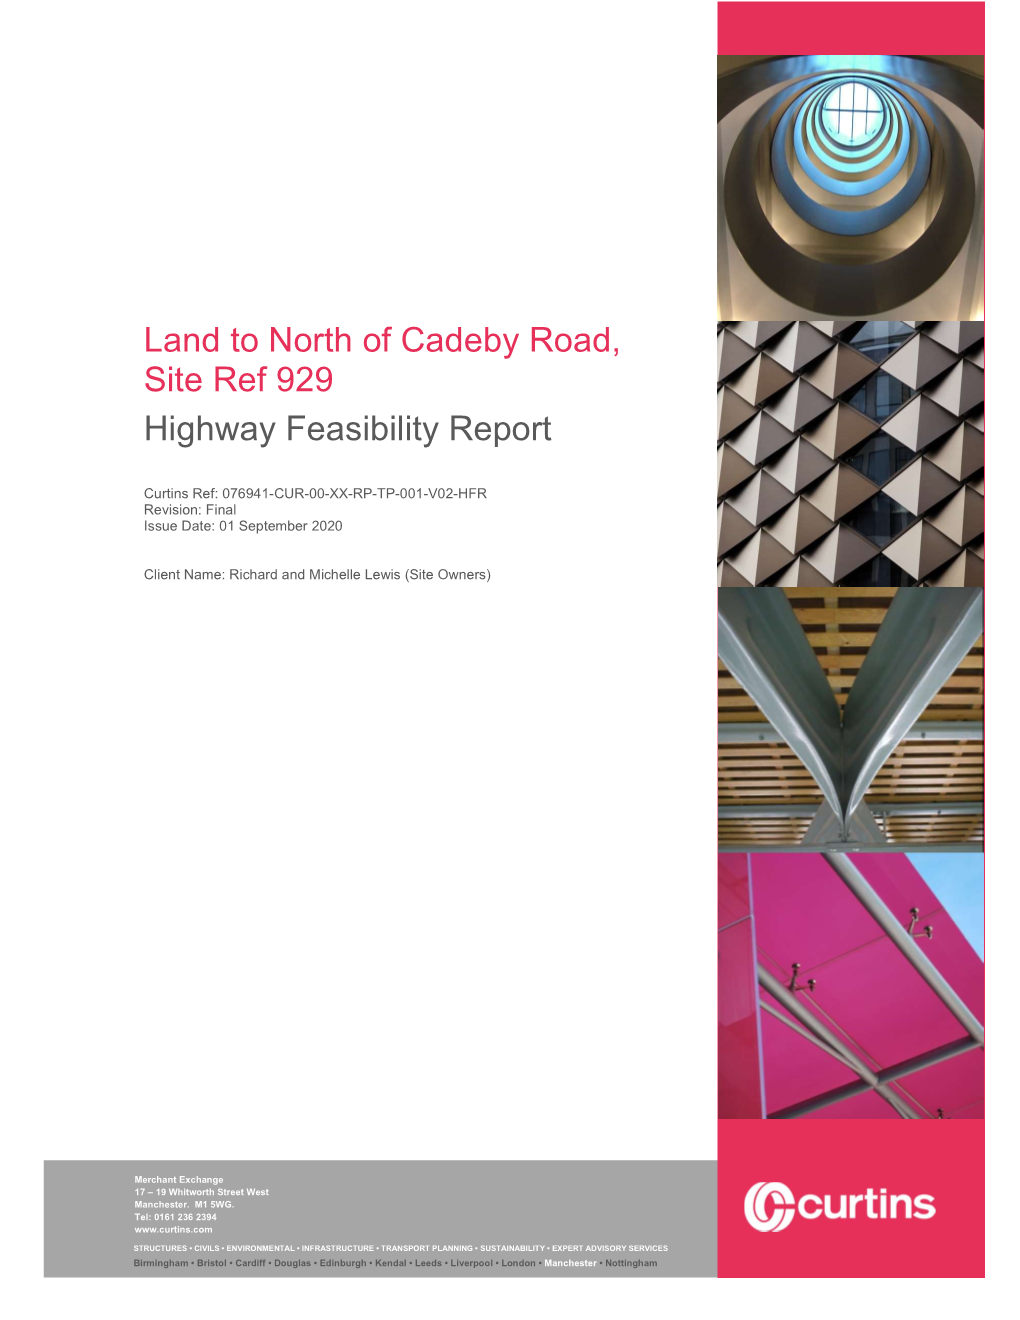 Land to North of Cadeby Road, Site Ref 929 Highway Feasibility Report